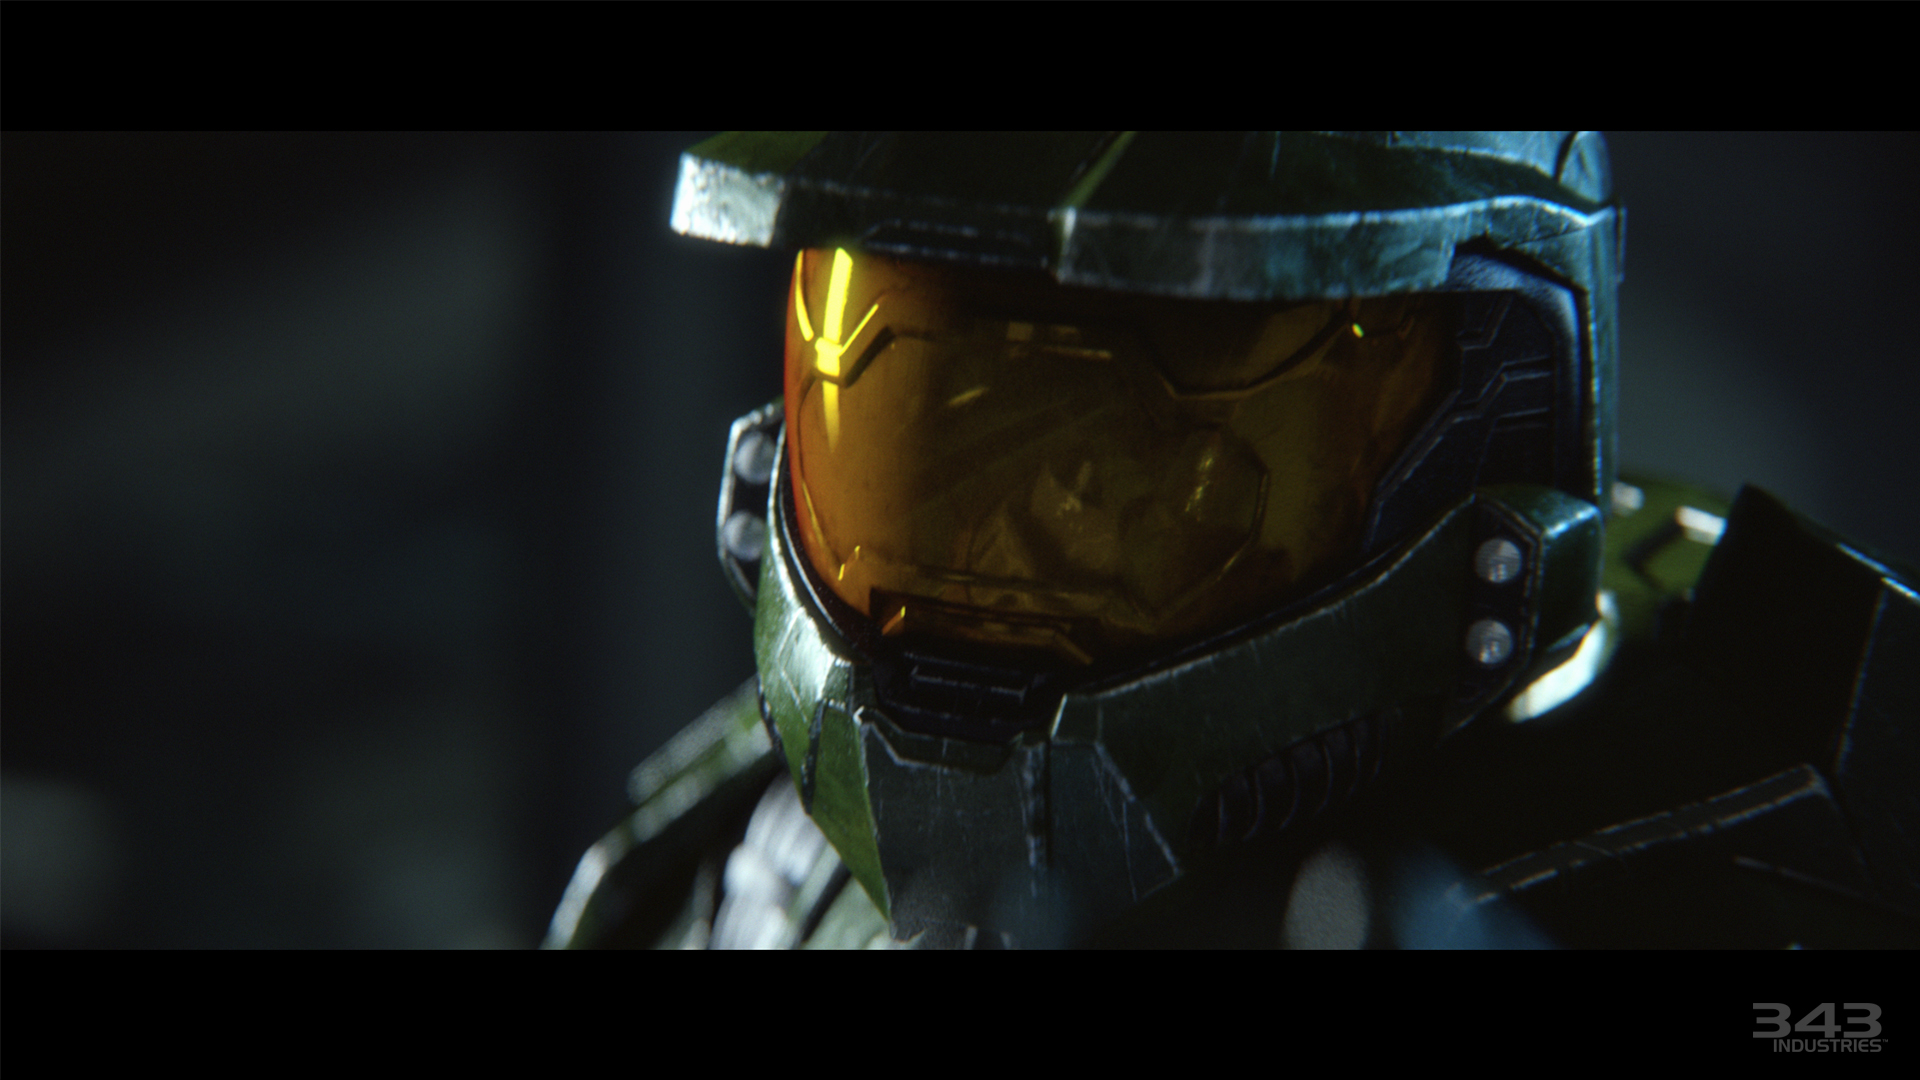 Halo: The Master Chief Collection Multiplayer Playlist Has Been Updated